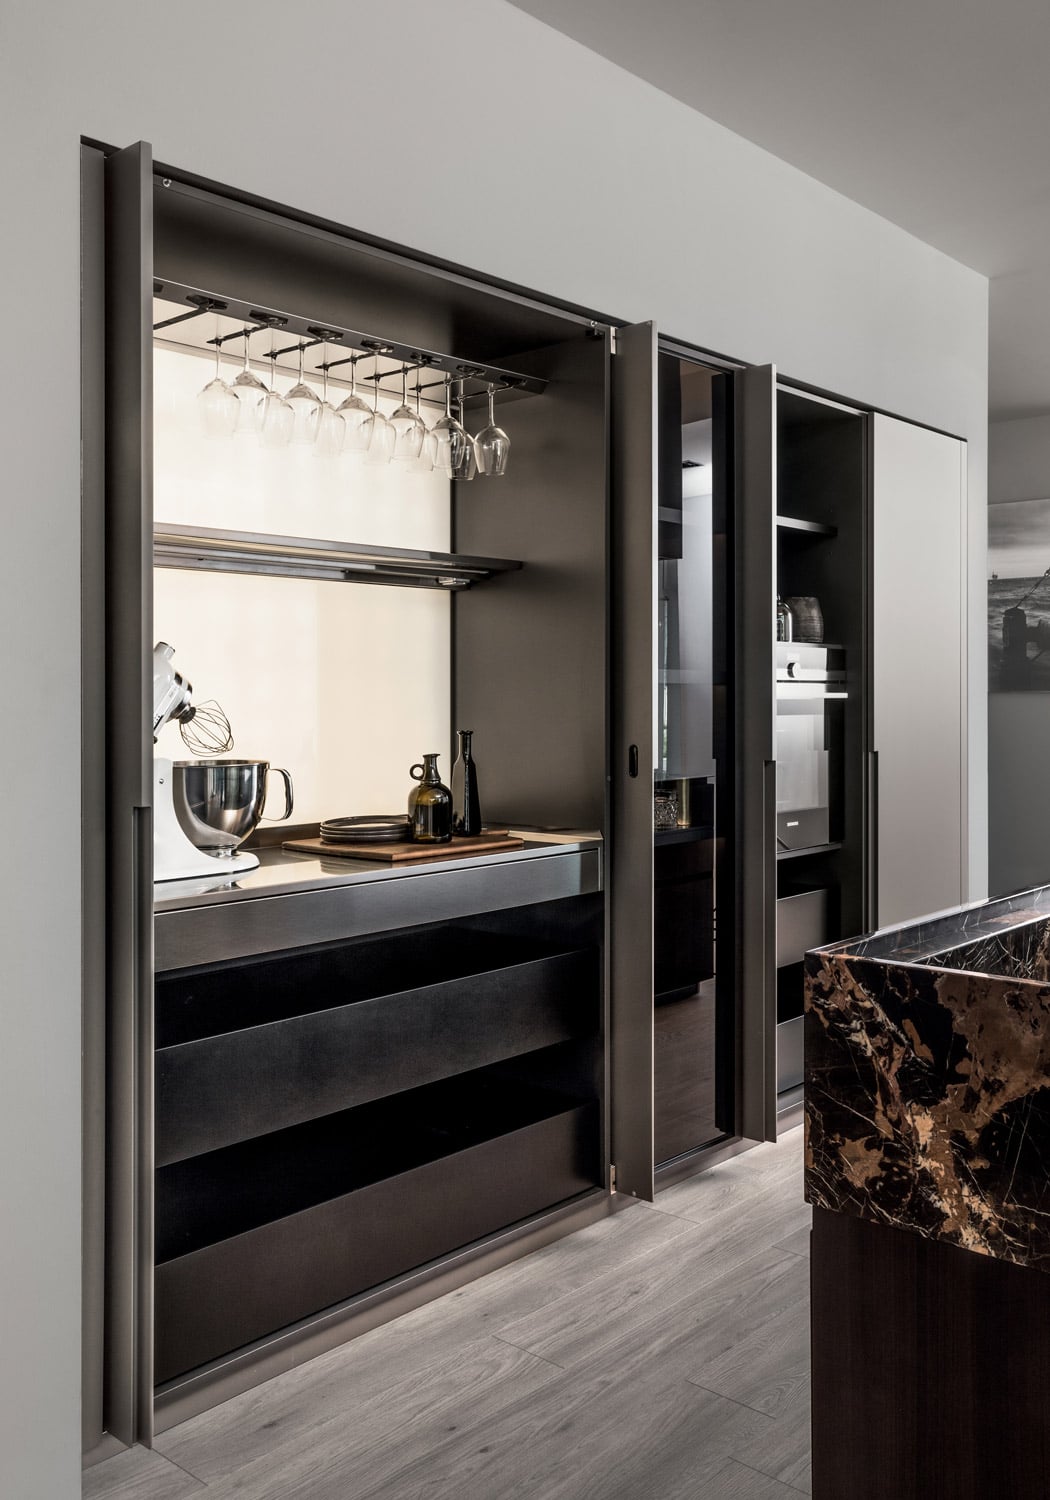 The units open with pocket doors which reveal customized storage and functional space including drawers, appliances, shelves, accessories racks, and worktops. 